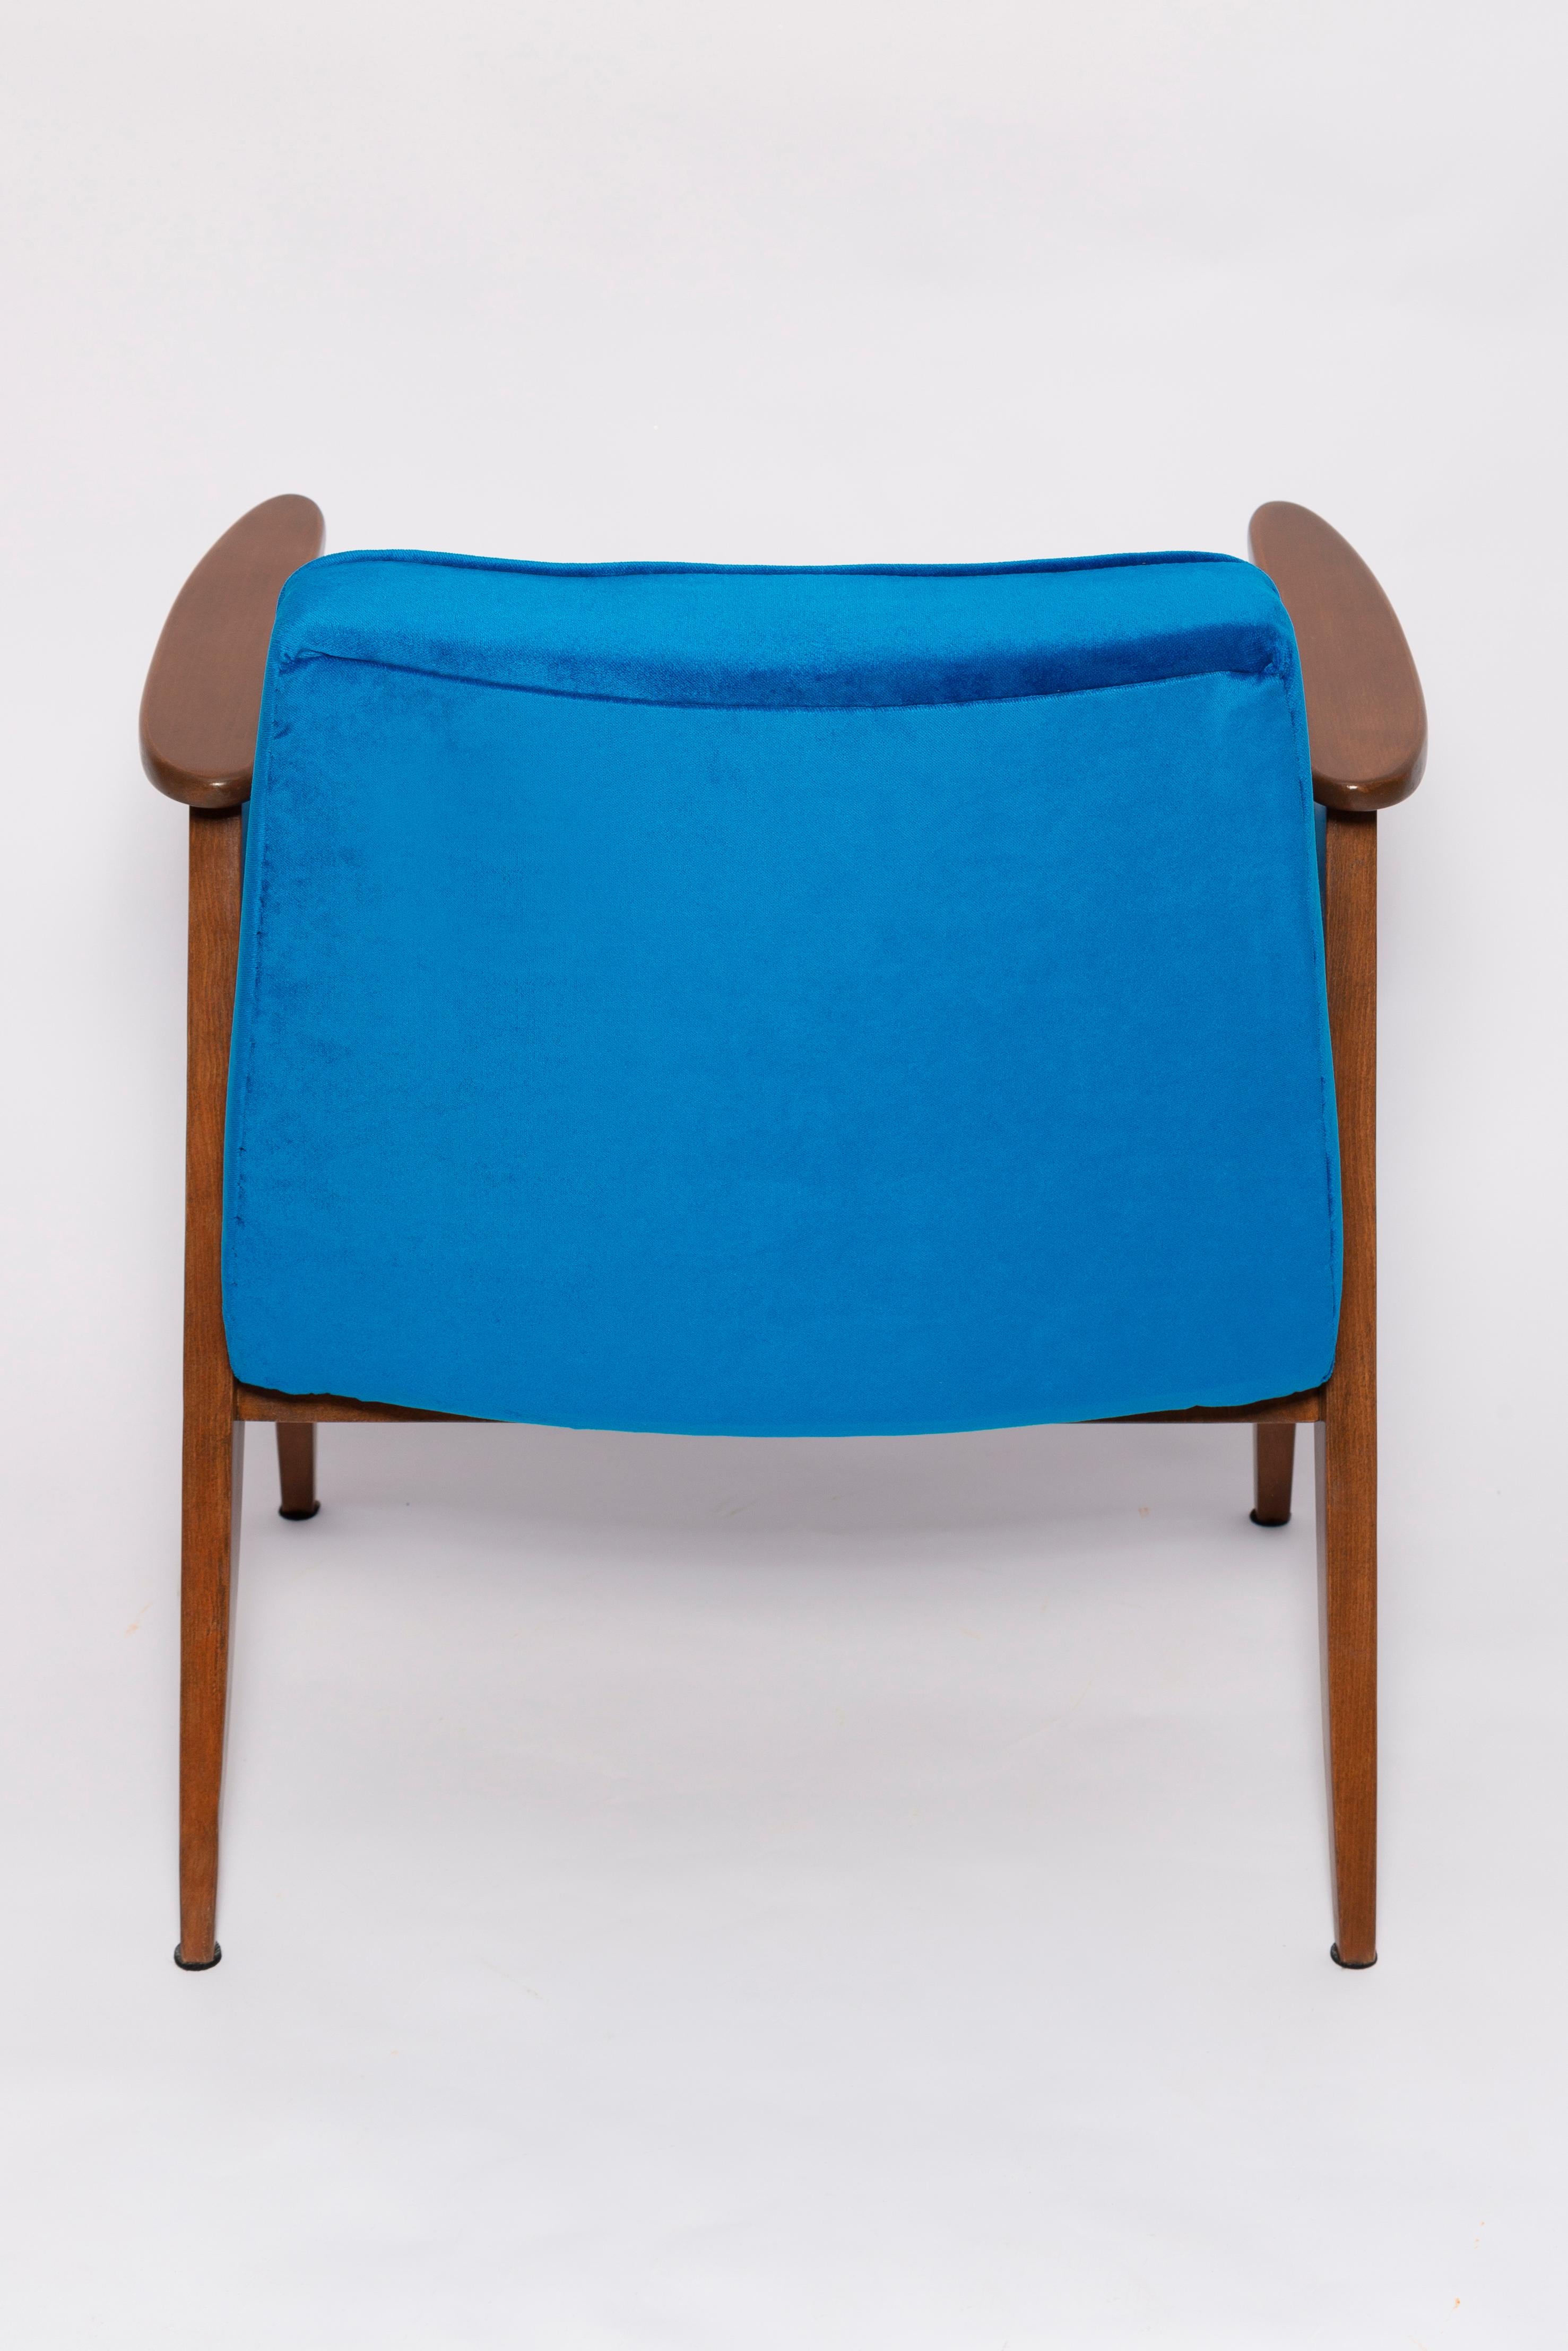 Pair of Mid-Century 366 Armchairs, Pink and Blue, by Chierowski Europe, 1960s For Sale 1